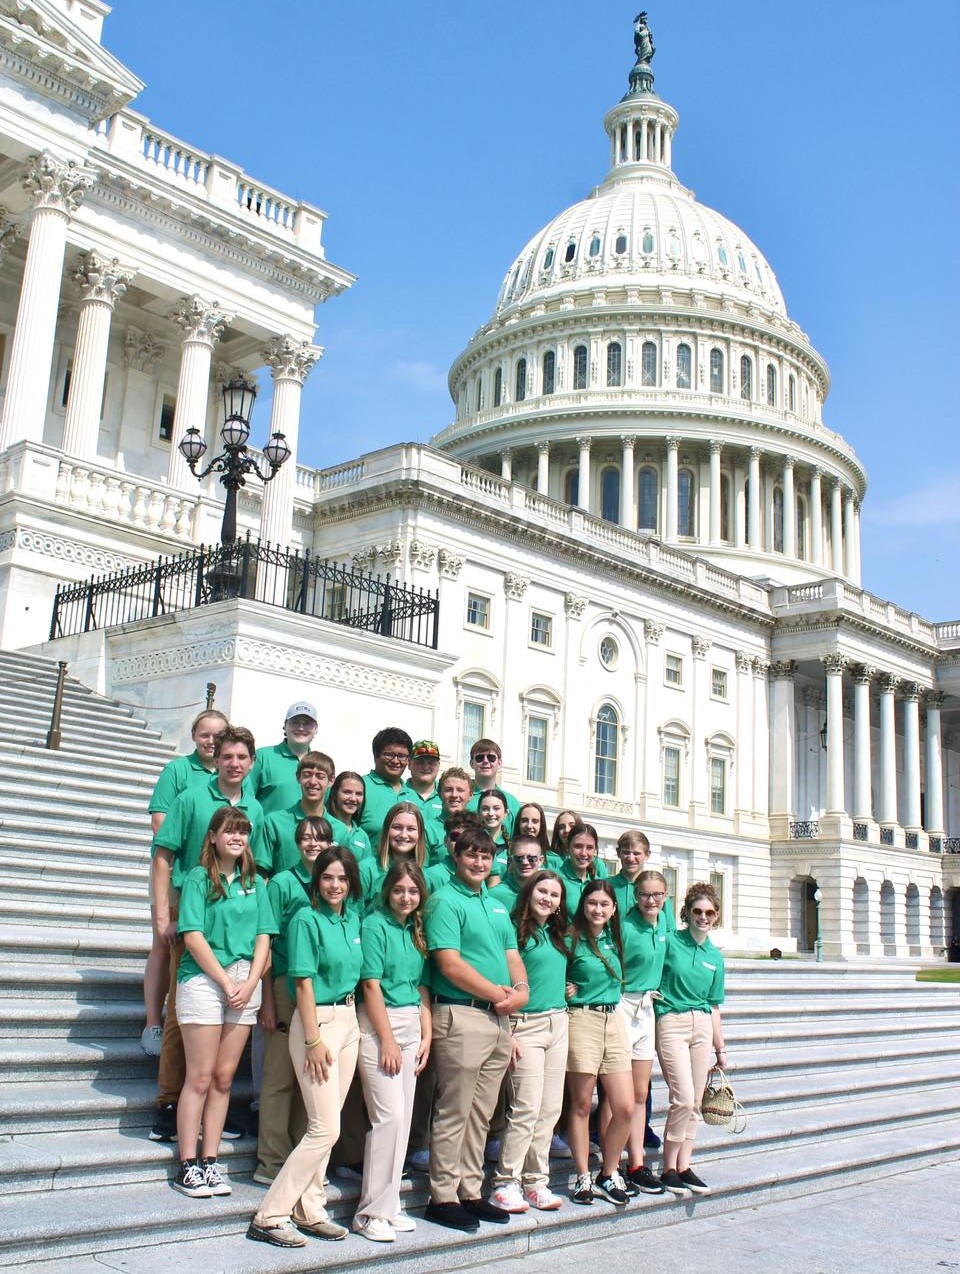 Arkansas youth on the steps of the U.S. Capitol building.